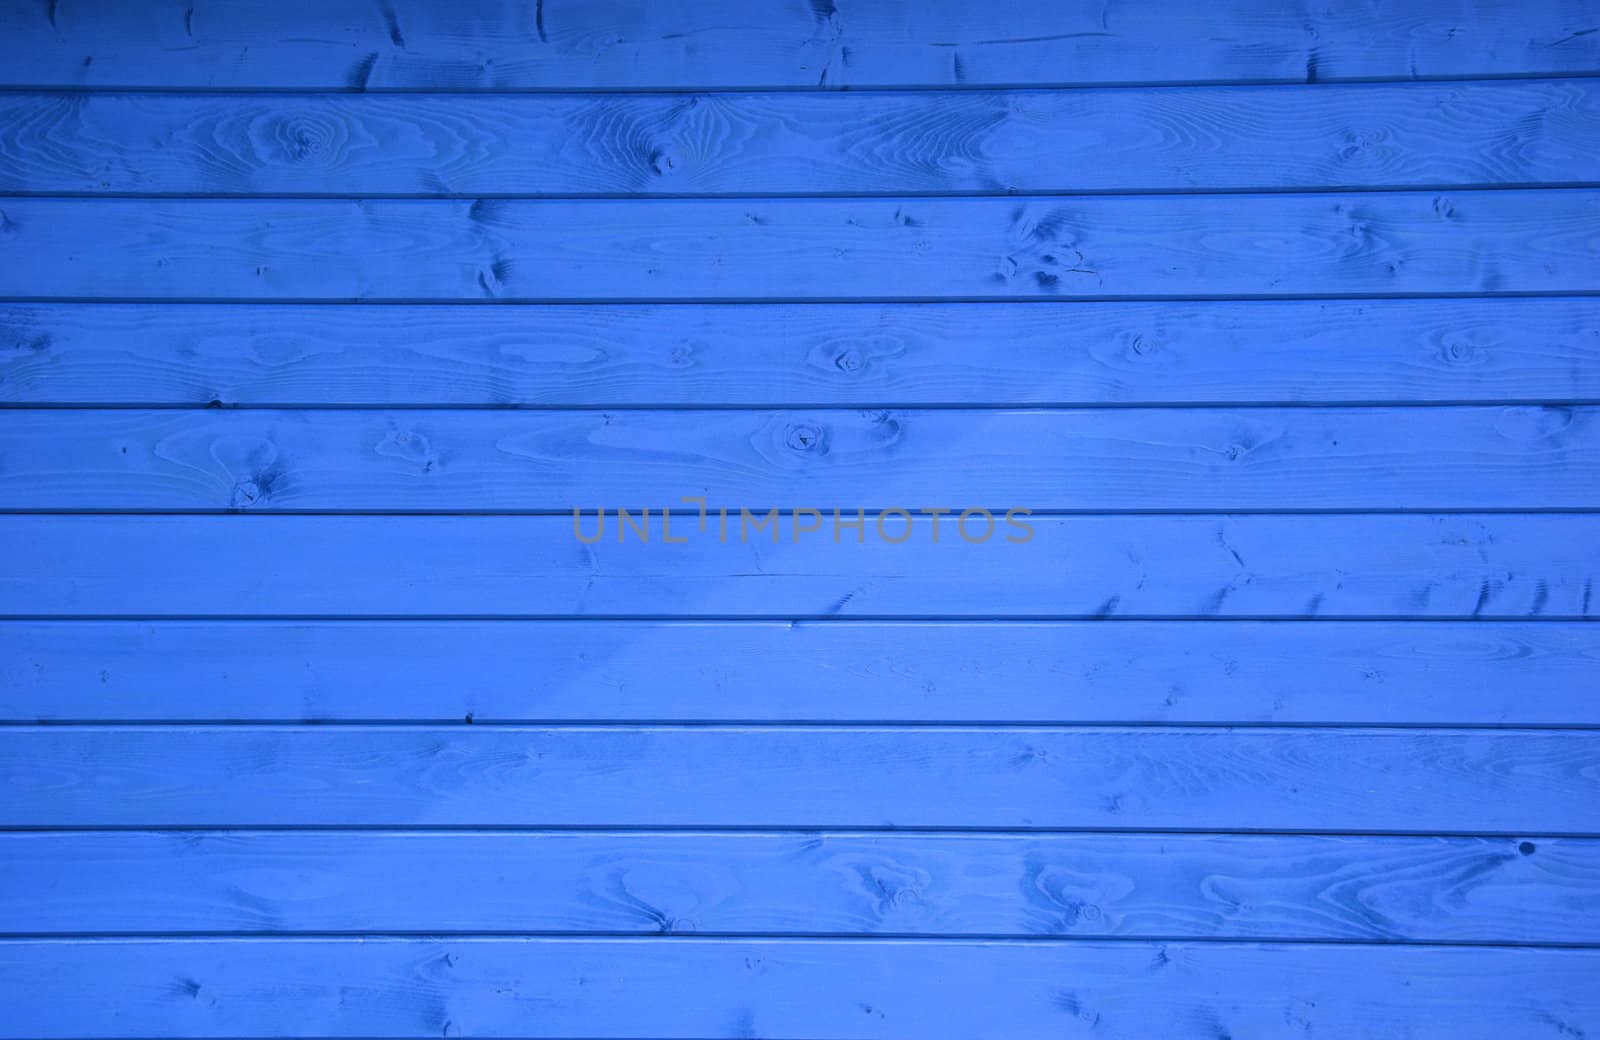 Abstract background made with blue wood boards